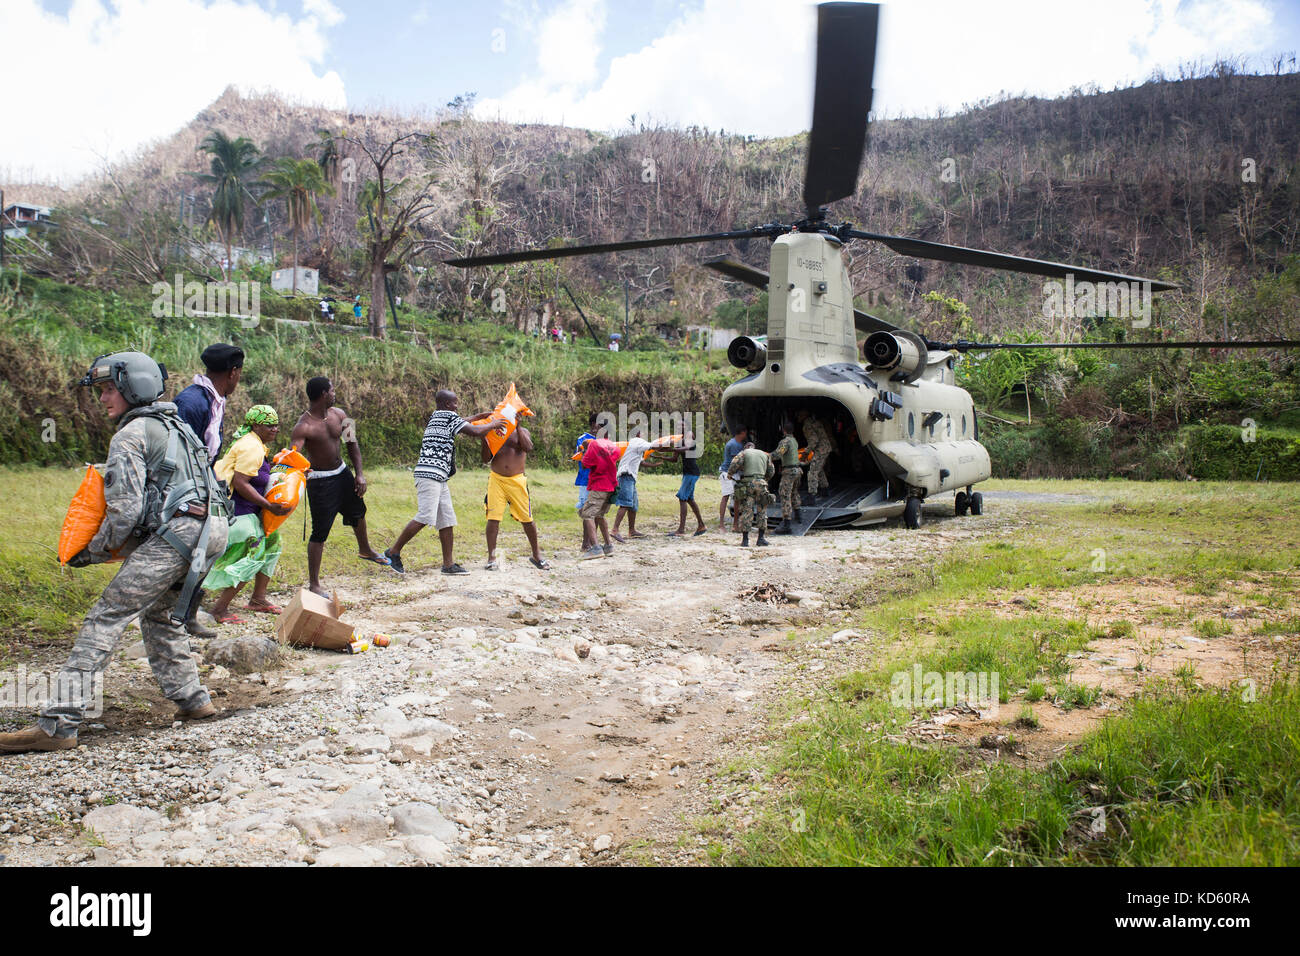 Aid being offloaded from a helicopter to people after Hurricane Maria tore through the caribbean and Puerto Rico. Stock Photo